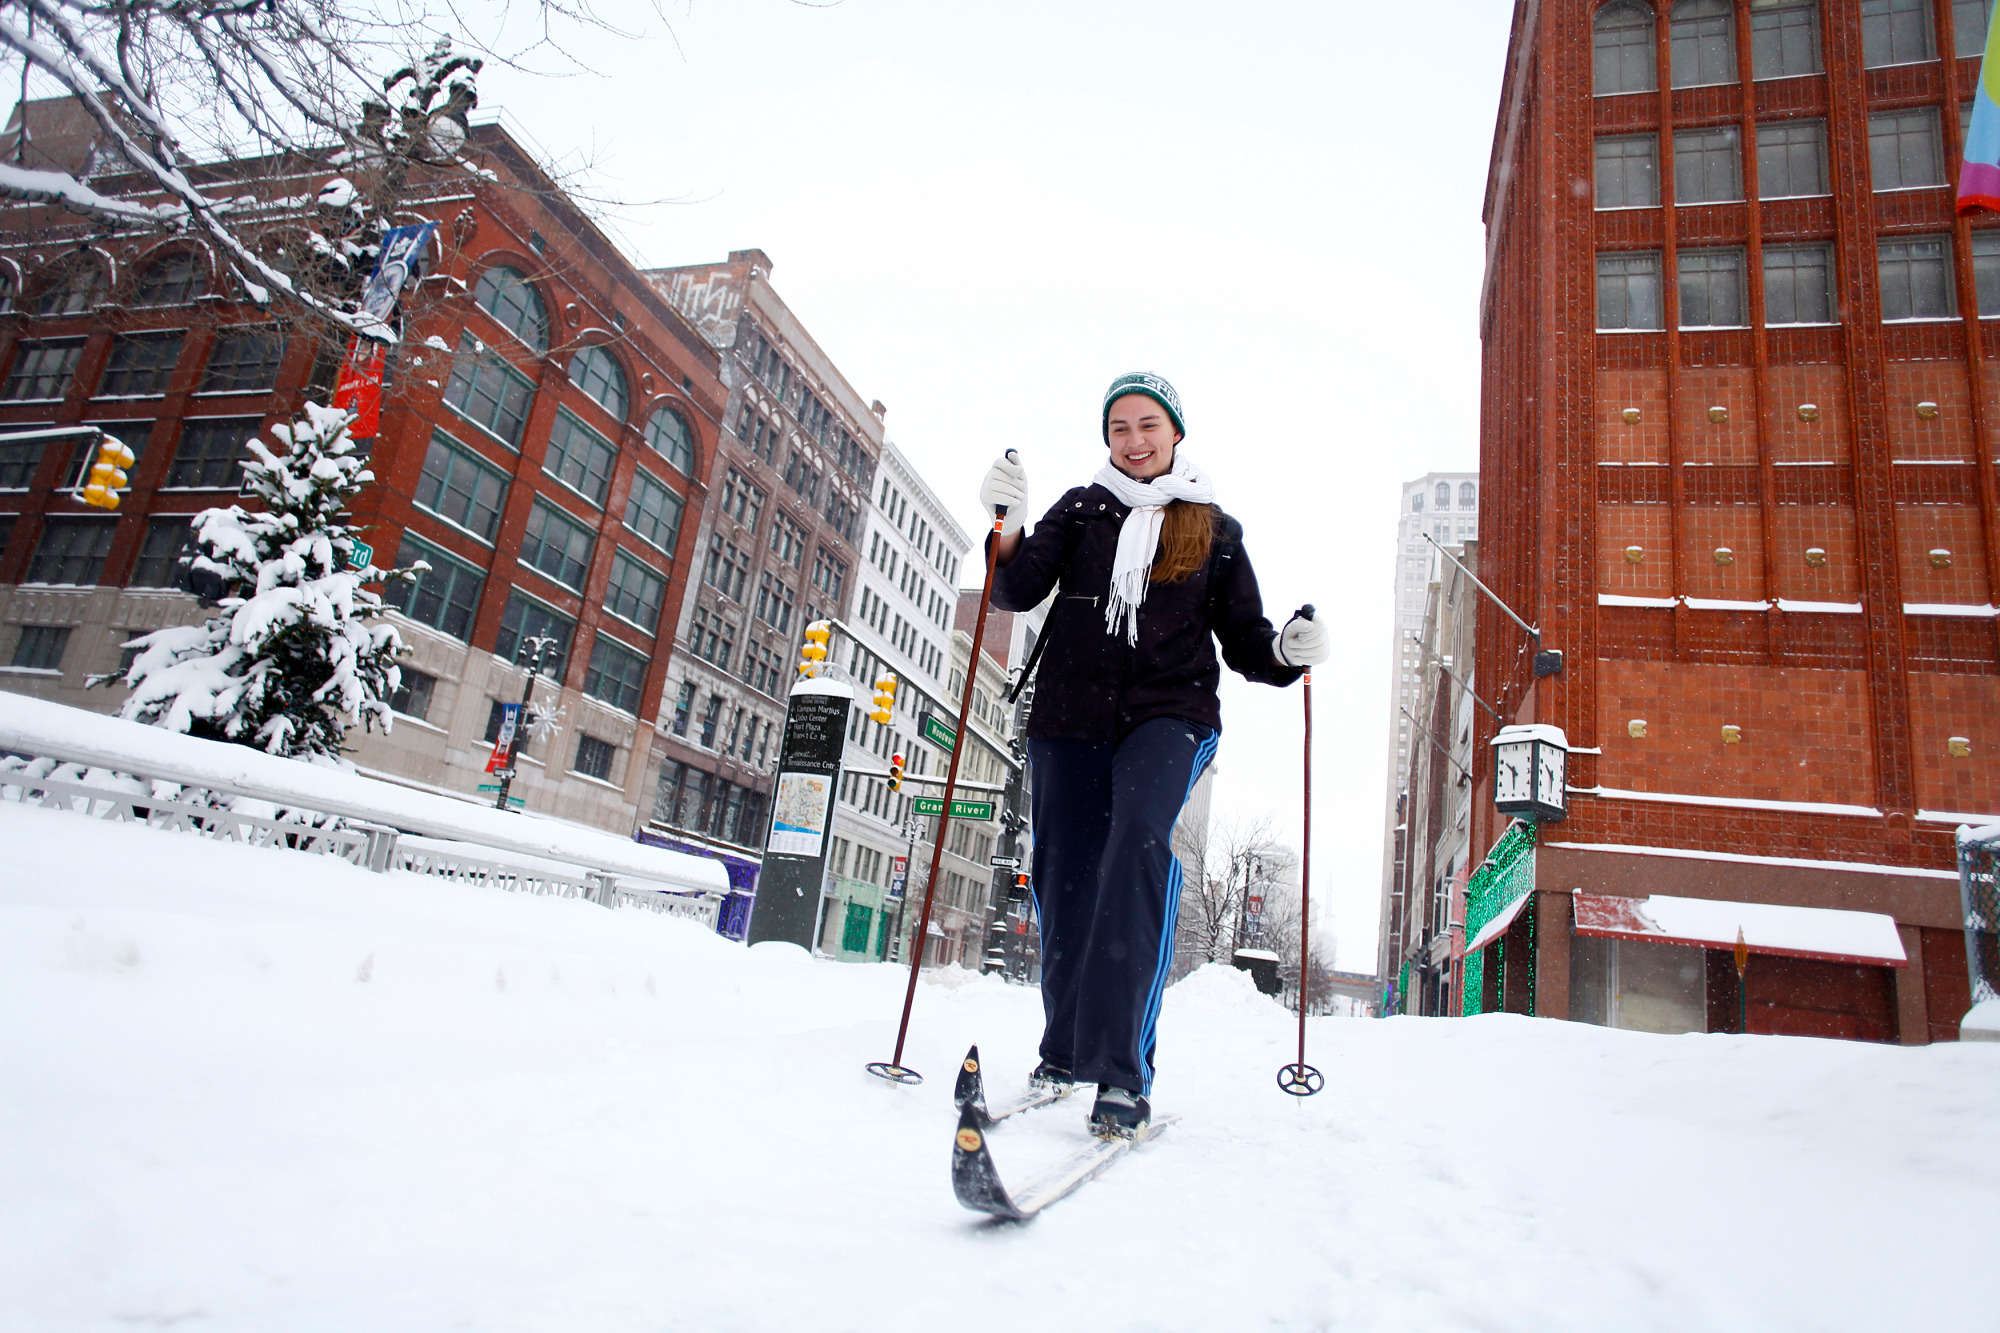 Alison Mueller skies to work through several inches of snow along Woodward Avenue as the area deals with record breaking freezing weather January 6, 2014 in Detroit, Michigan